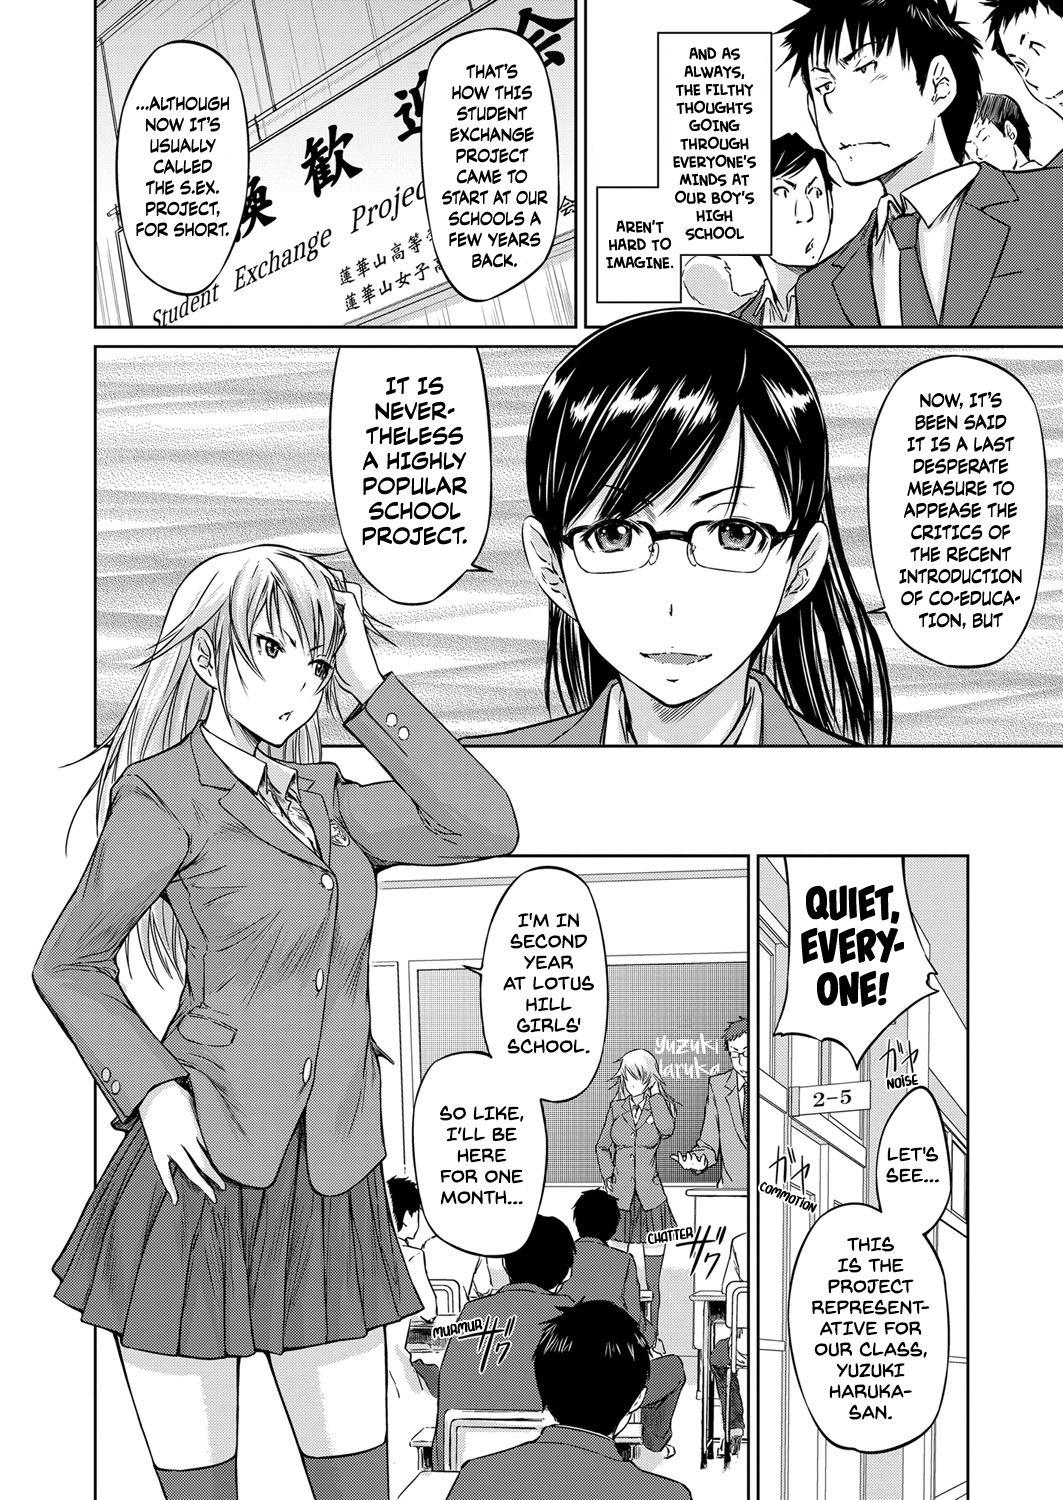 Pussy Orgasm Seitou Koukan no Susume | Student Exchange Recommendation Class Room - Page 2